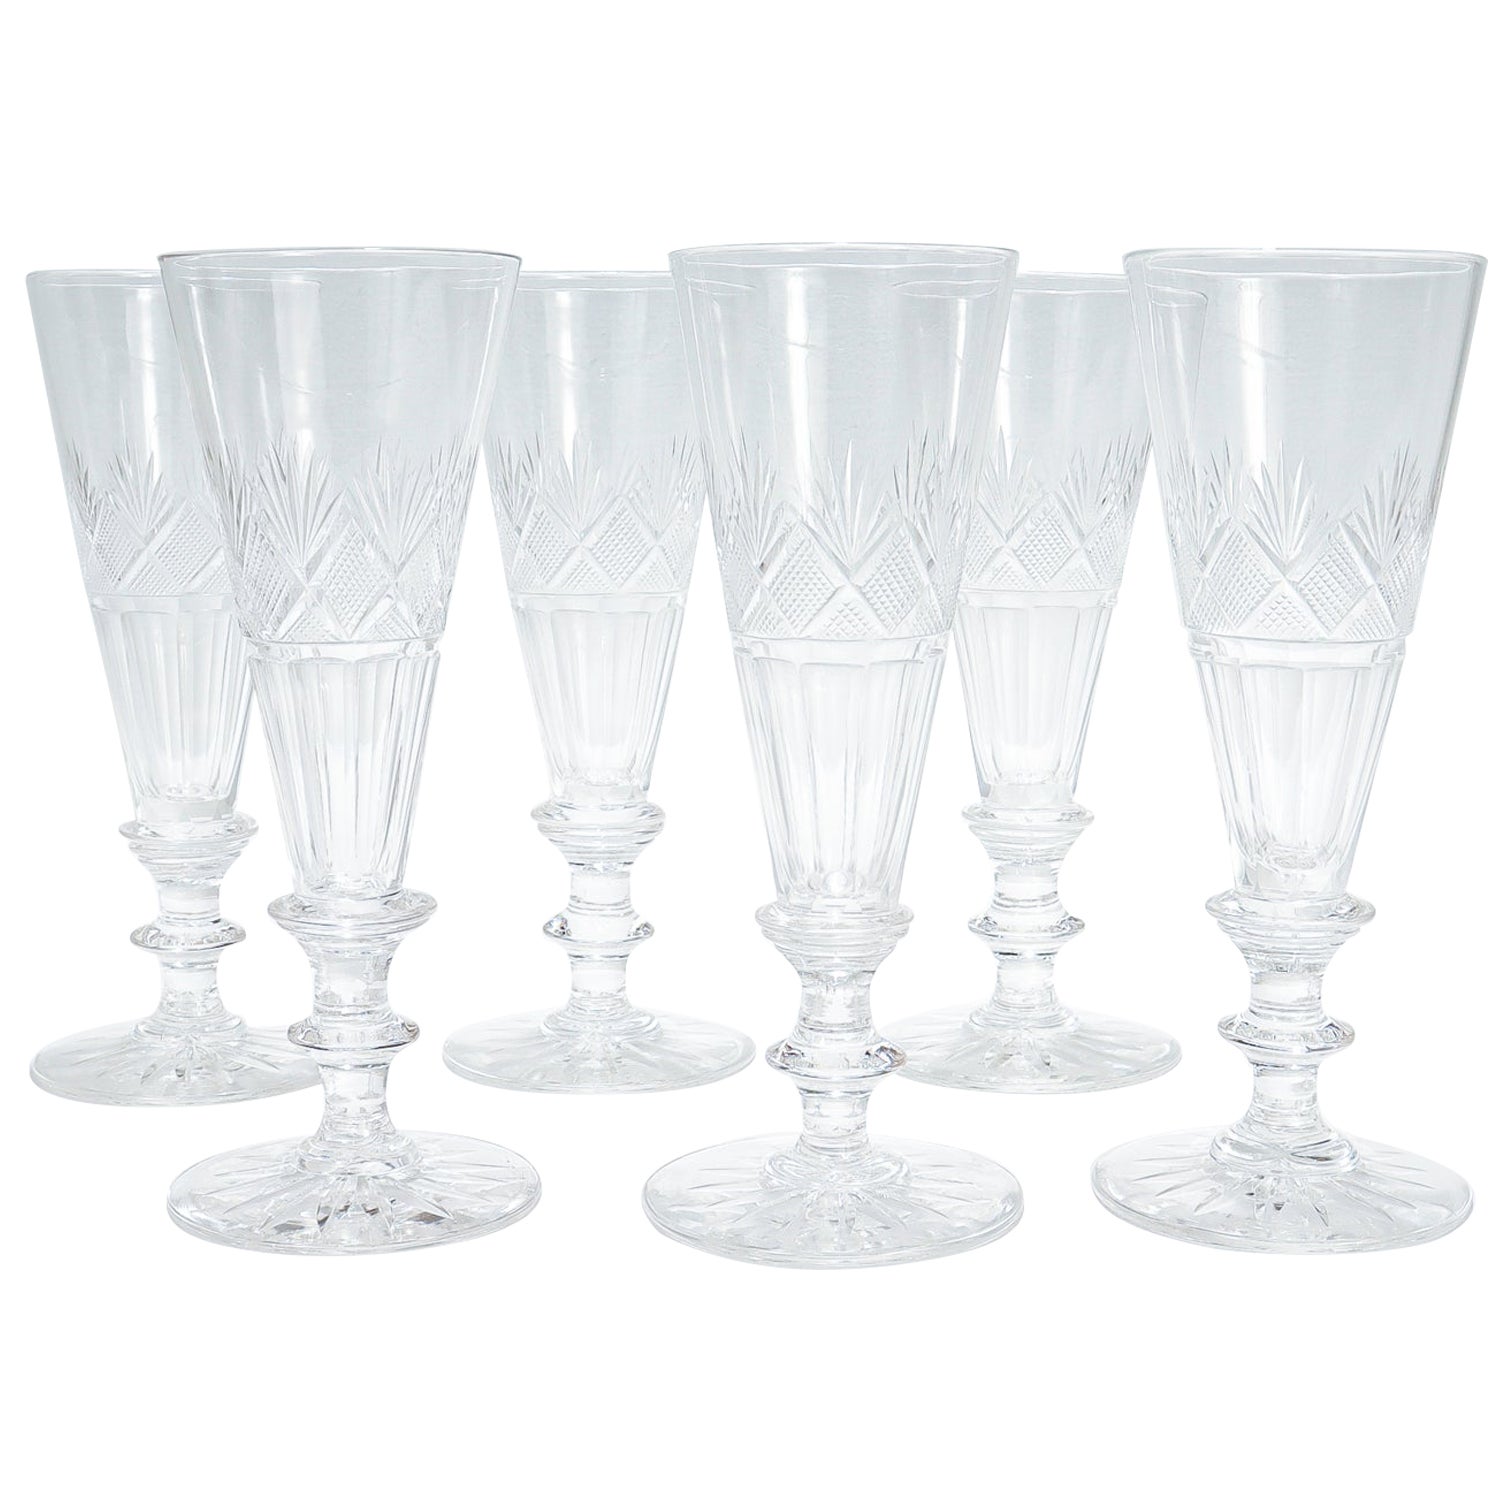 Set of 6 Antique 19th Century Cut Glass Champagne Flutes Attributed to Bakewell